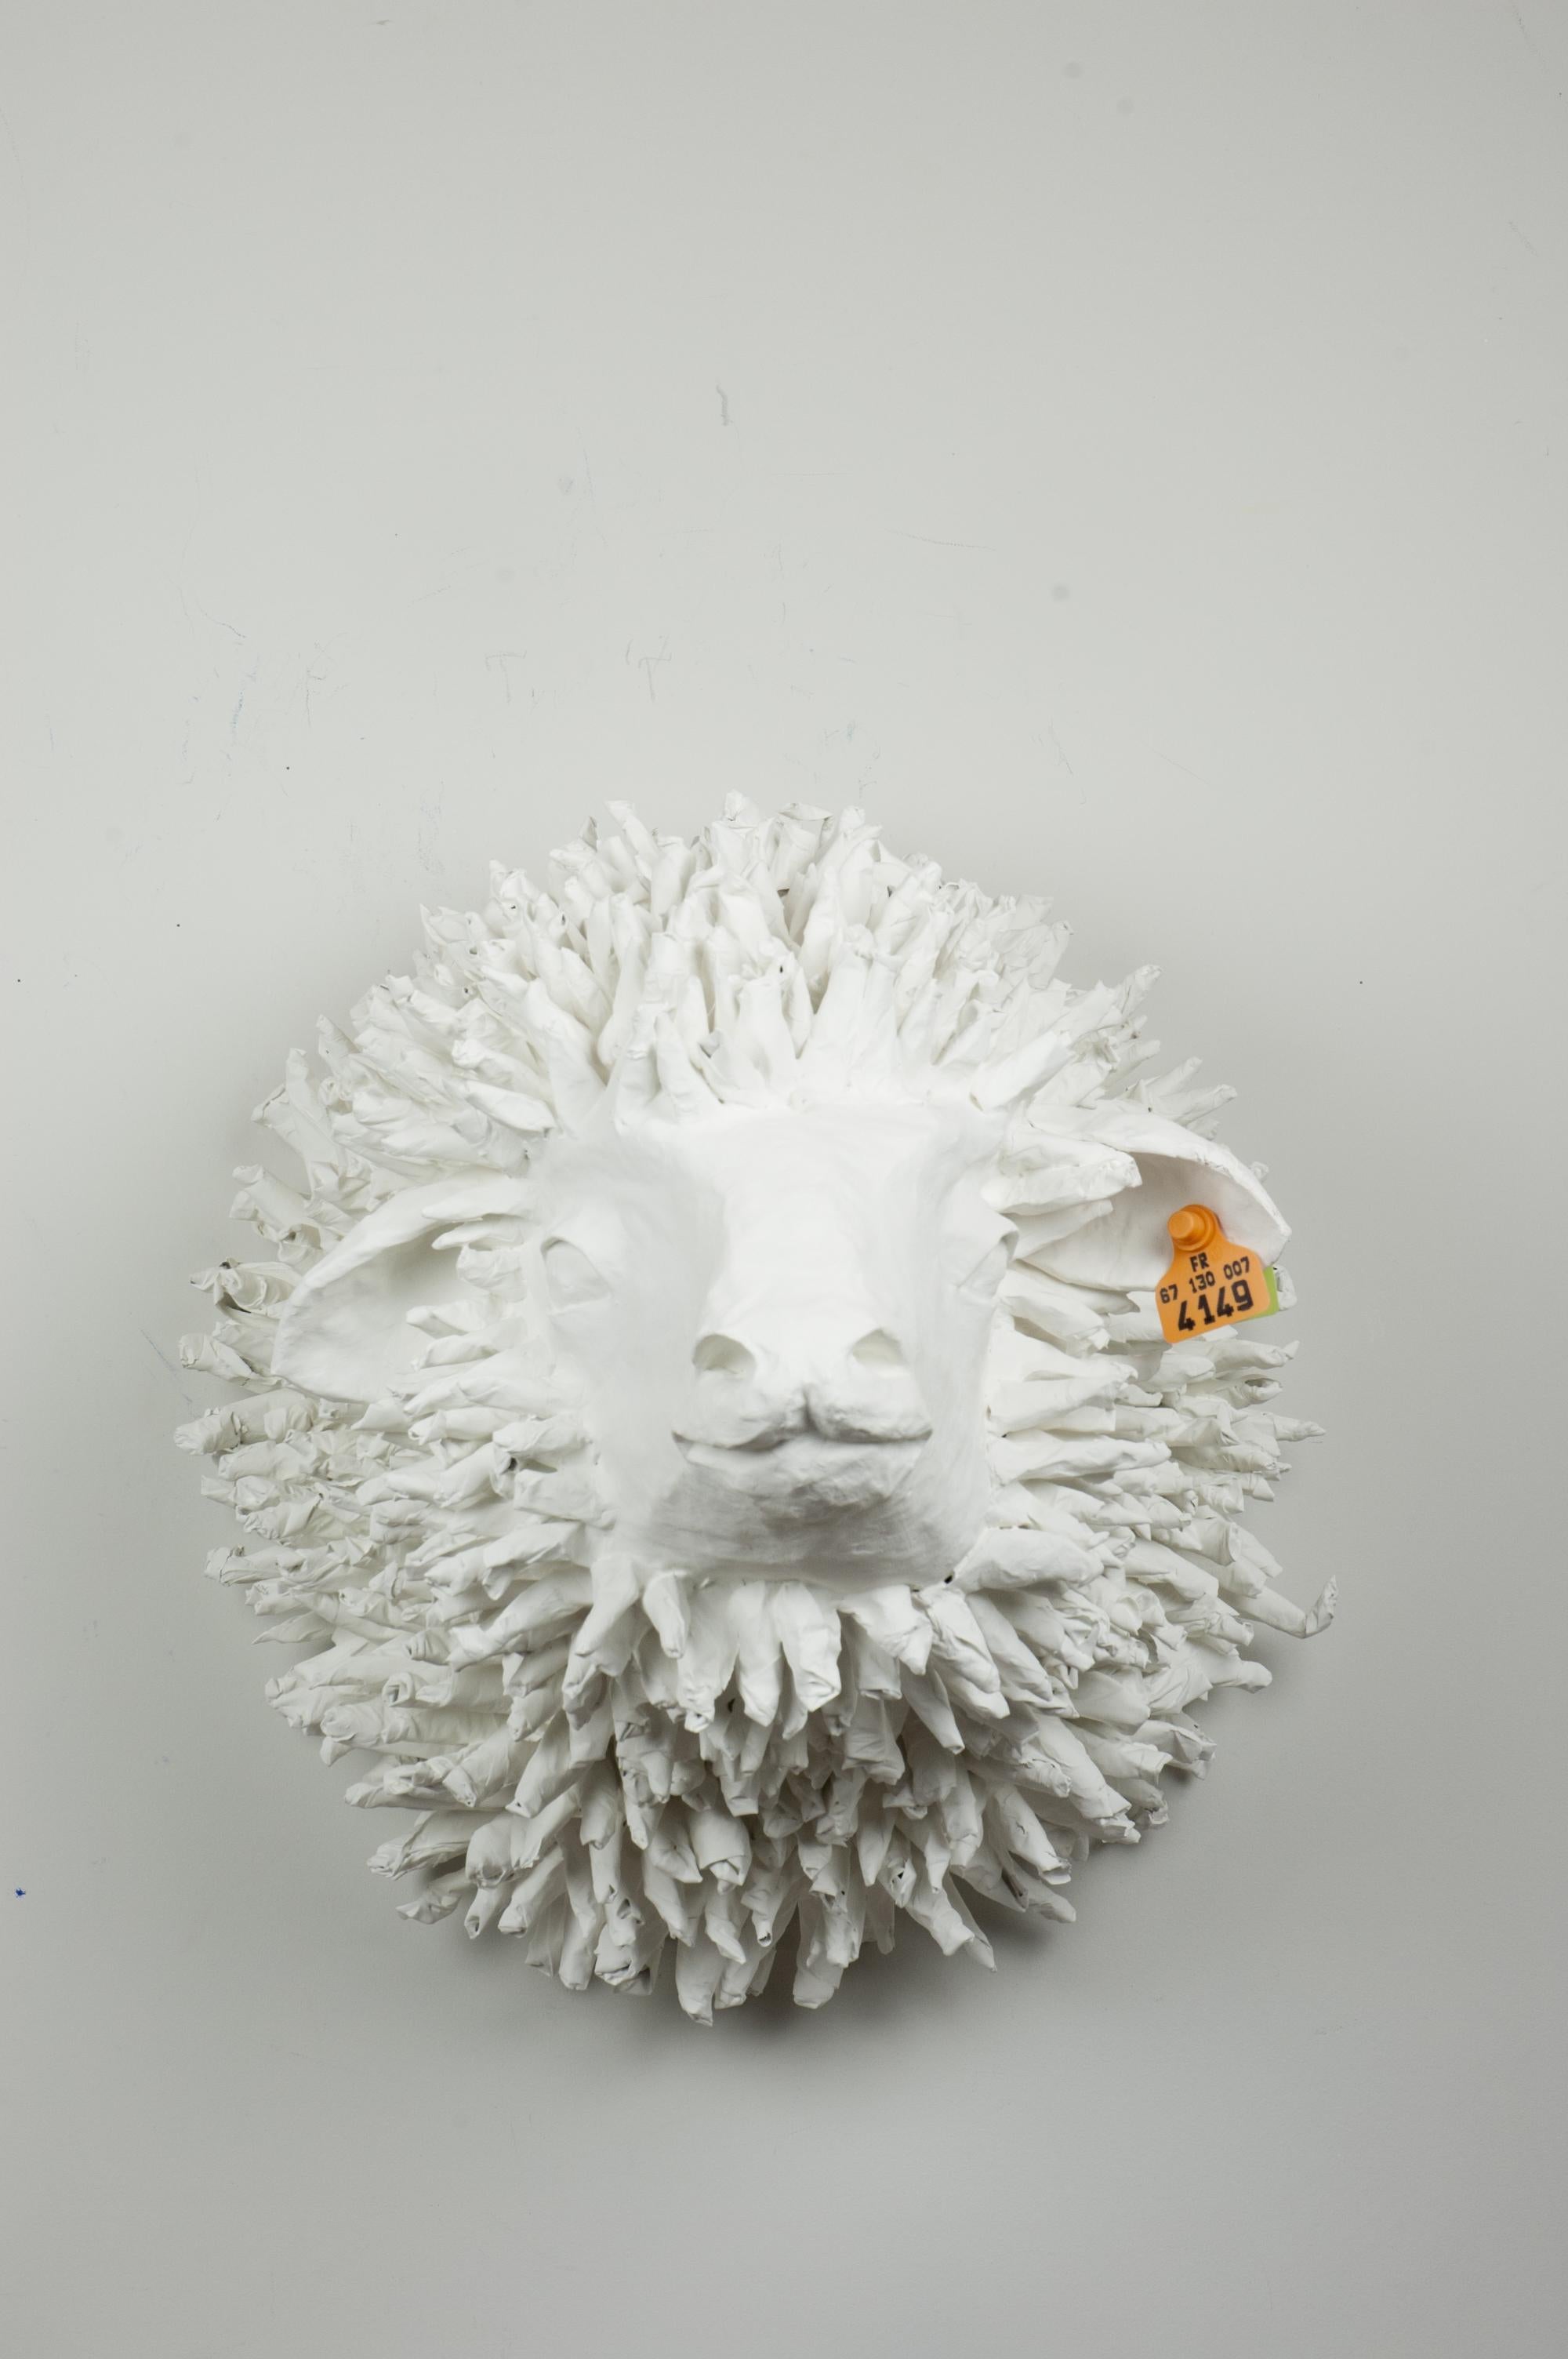 Life-sized sheep trophies are the new in-thing. This papier-mâché trophy adds that French panache to any contemporary setting. Decidedly modern, all in white, it harmonizes with every decor. Each handmade trophy is one-of-a-kind, with its own